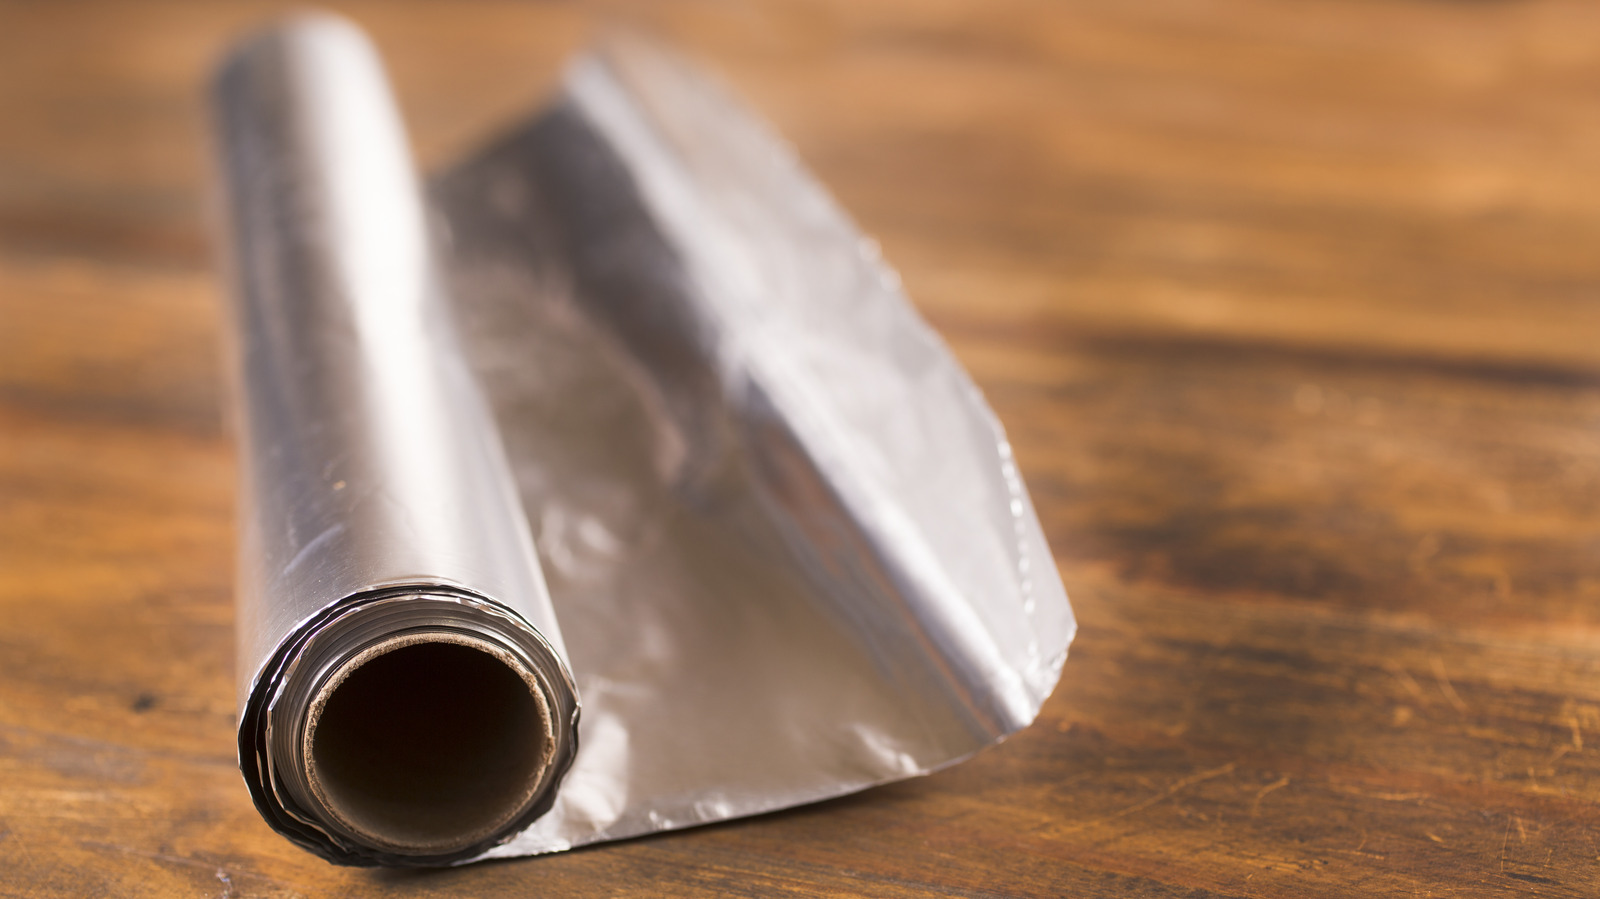 Why Aluminum Foil Is Shiny on One Side